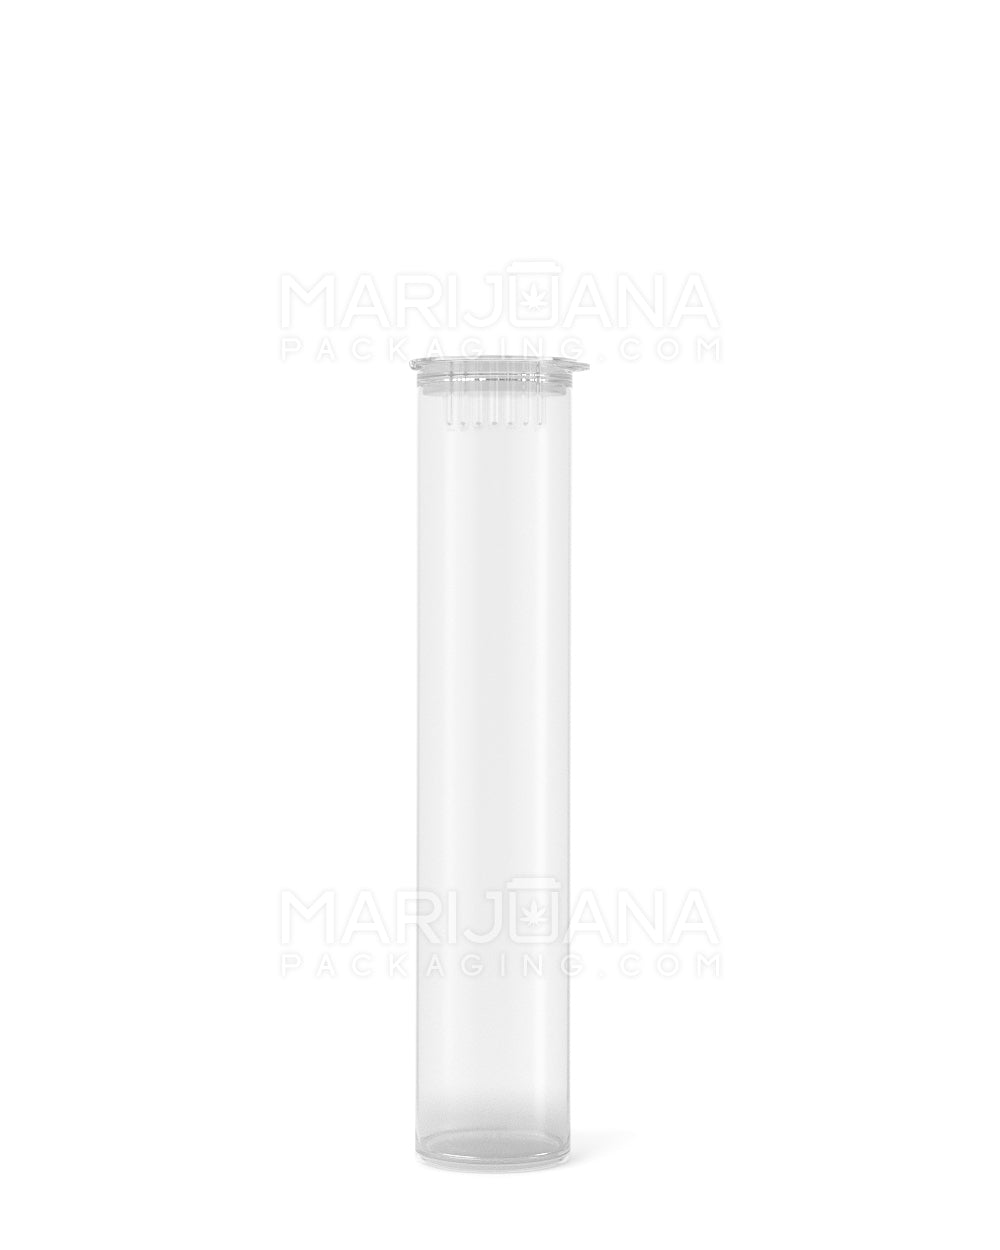 Child Resistant & Sustainable | 100% Biodegradable Pop Top Plastic Pre-Roll Tubes | 95mm - Clear - 1000 Count - 3